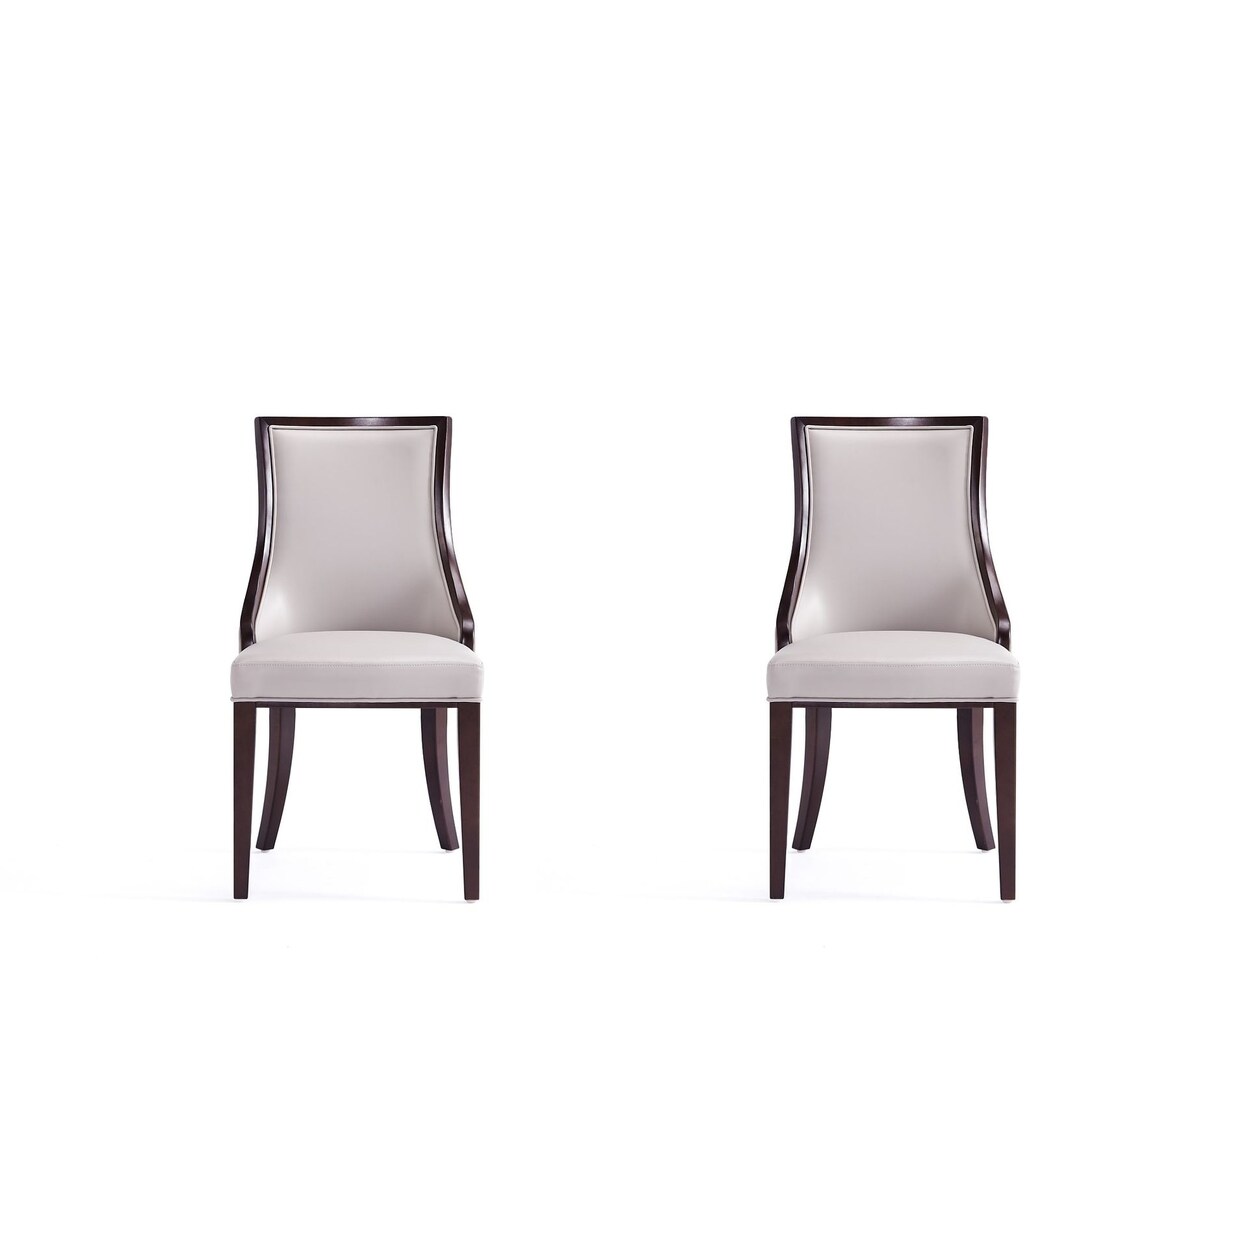 Manhattan Comfort Grand Faux Leather Dining Chair with Beech Wood Frame (Set of 2)